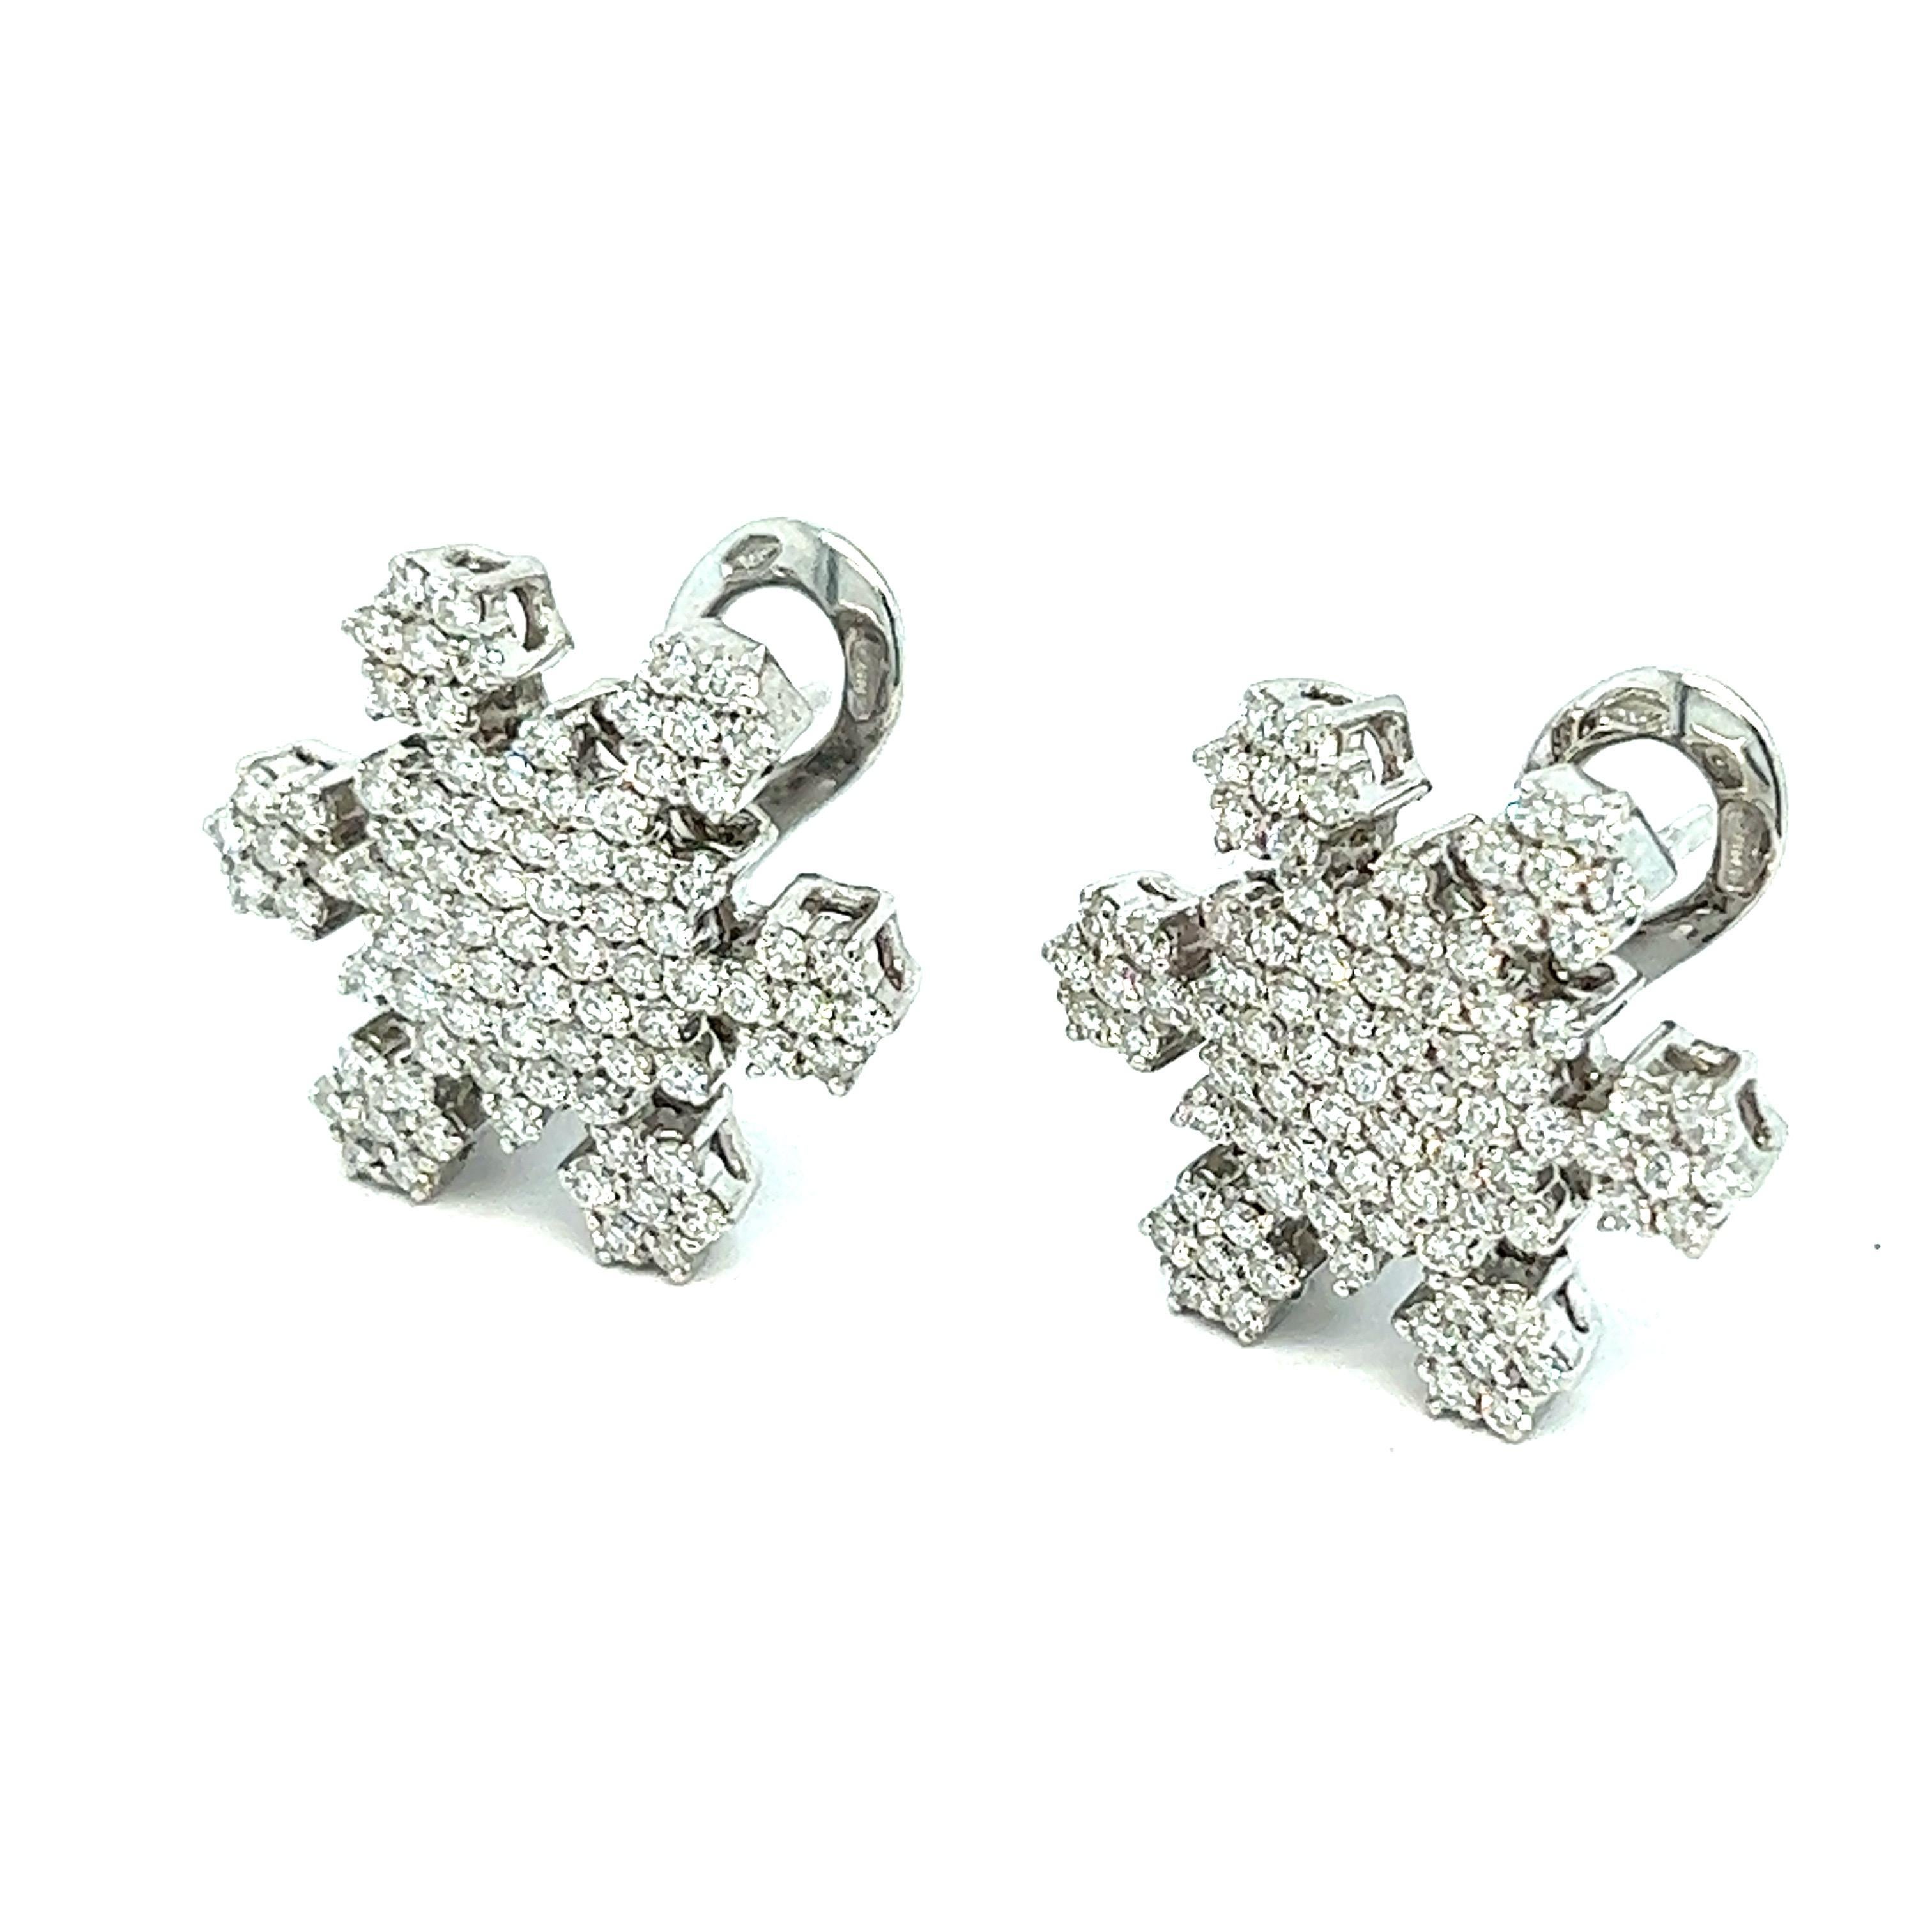 Diamond snowflake earrings, made in Italy

Beautiful round-cut diamonds of 2 carats, snowflake motif, 18 karat white gold; marked 750

Size: width 1.6 cm, length 1.8 cm
Total weight: 9.5 grams